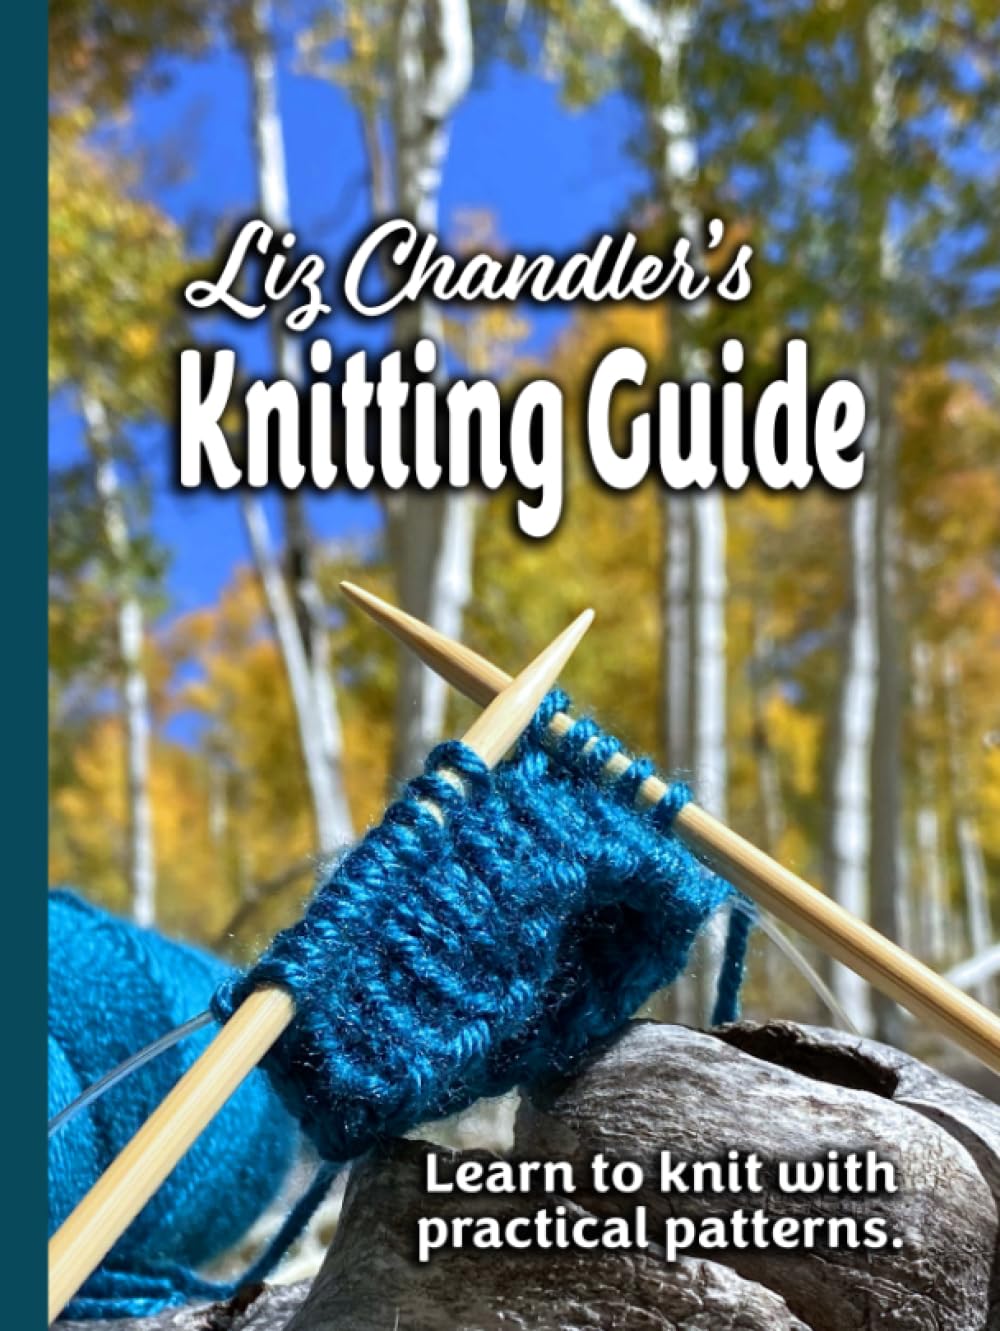 Liz Chandler's Knitting Guide: Learn to Knit with Practical Patterns.